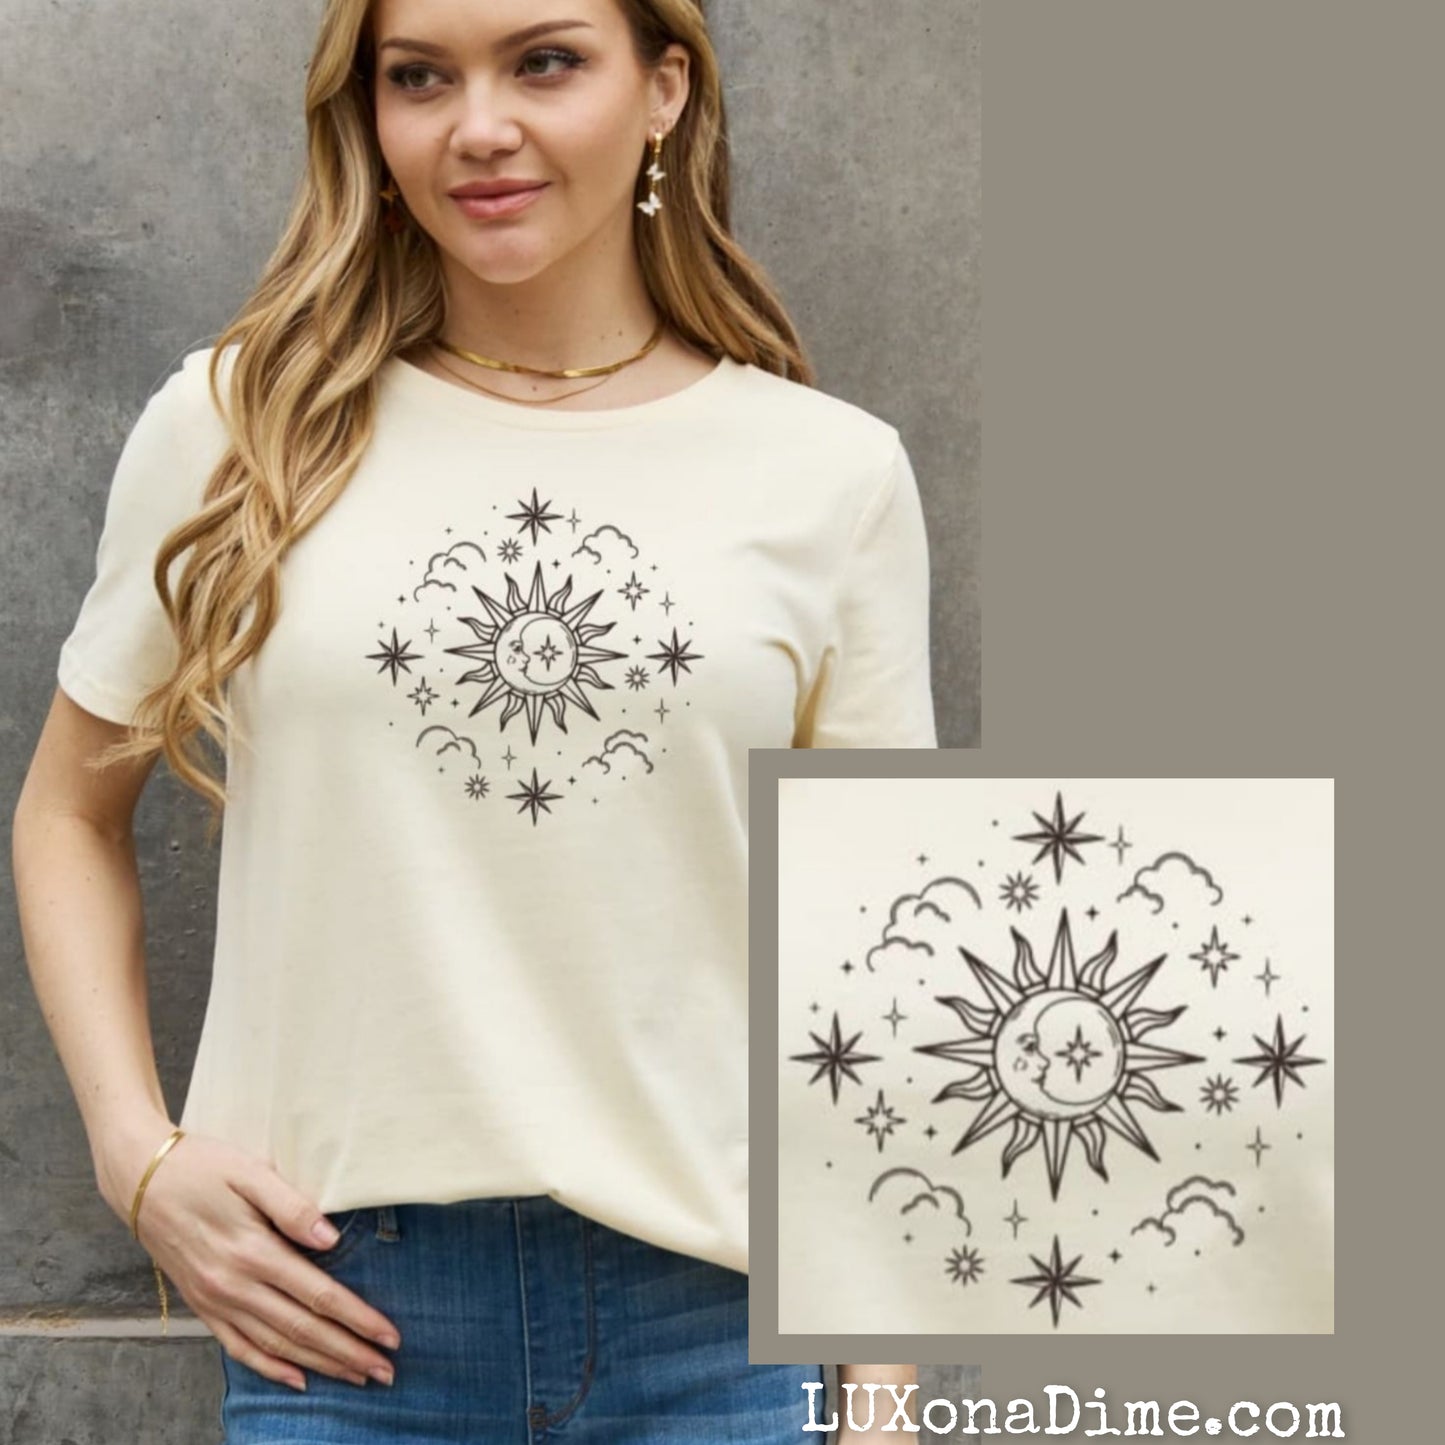 SUN MOON CLOUDS Celestial Graphic Short Sleeve 100% Cotton Tee Shirt (Plus Size Available)